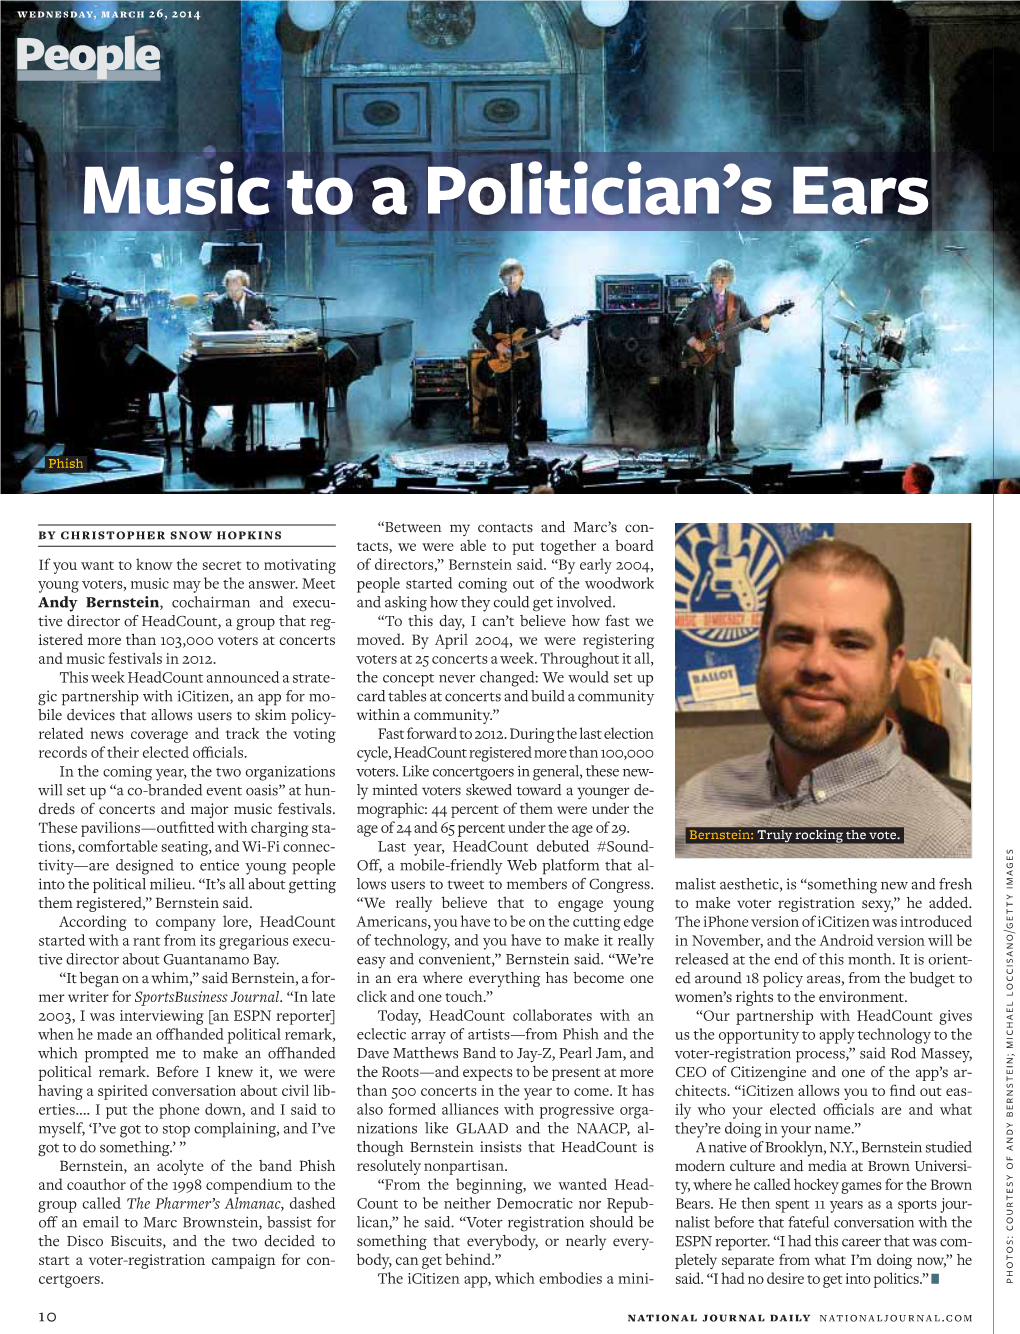 Music to a Politician's Ears